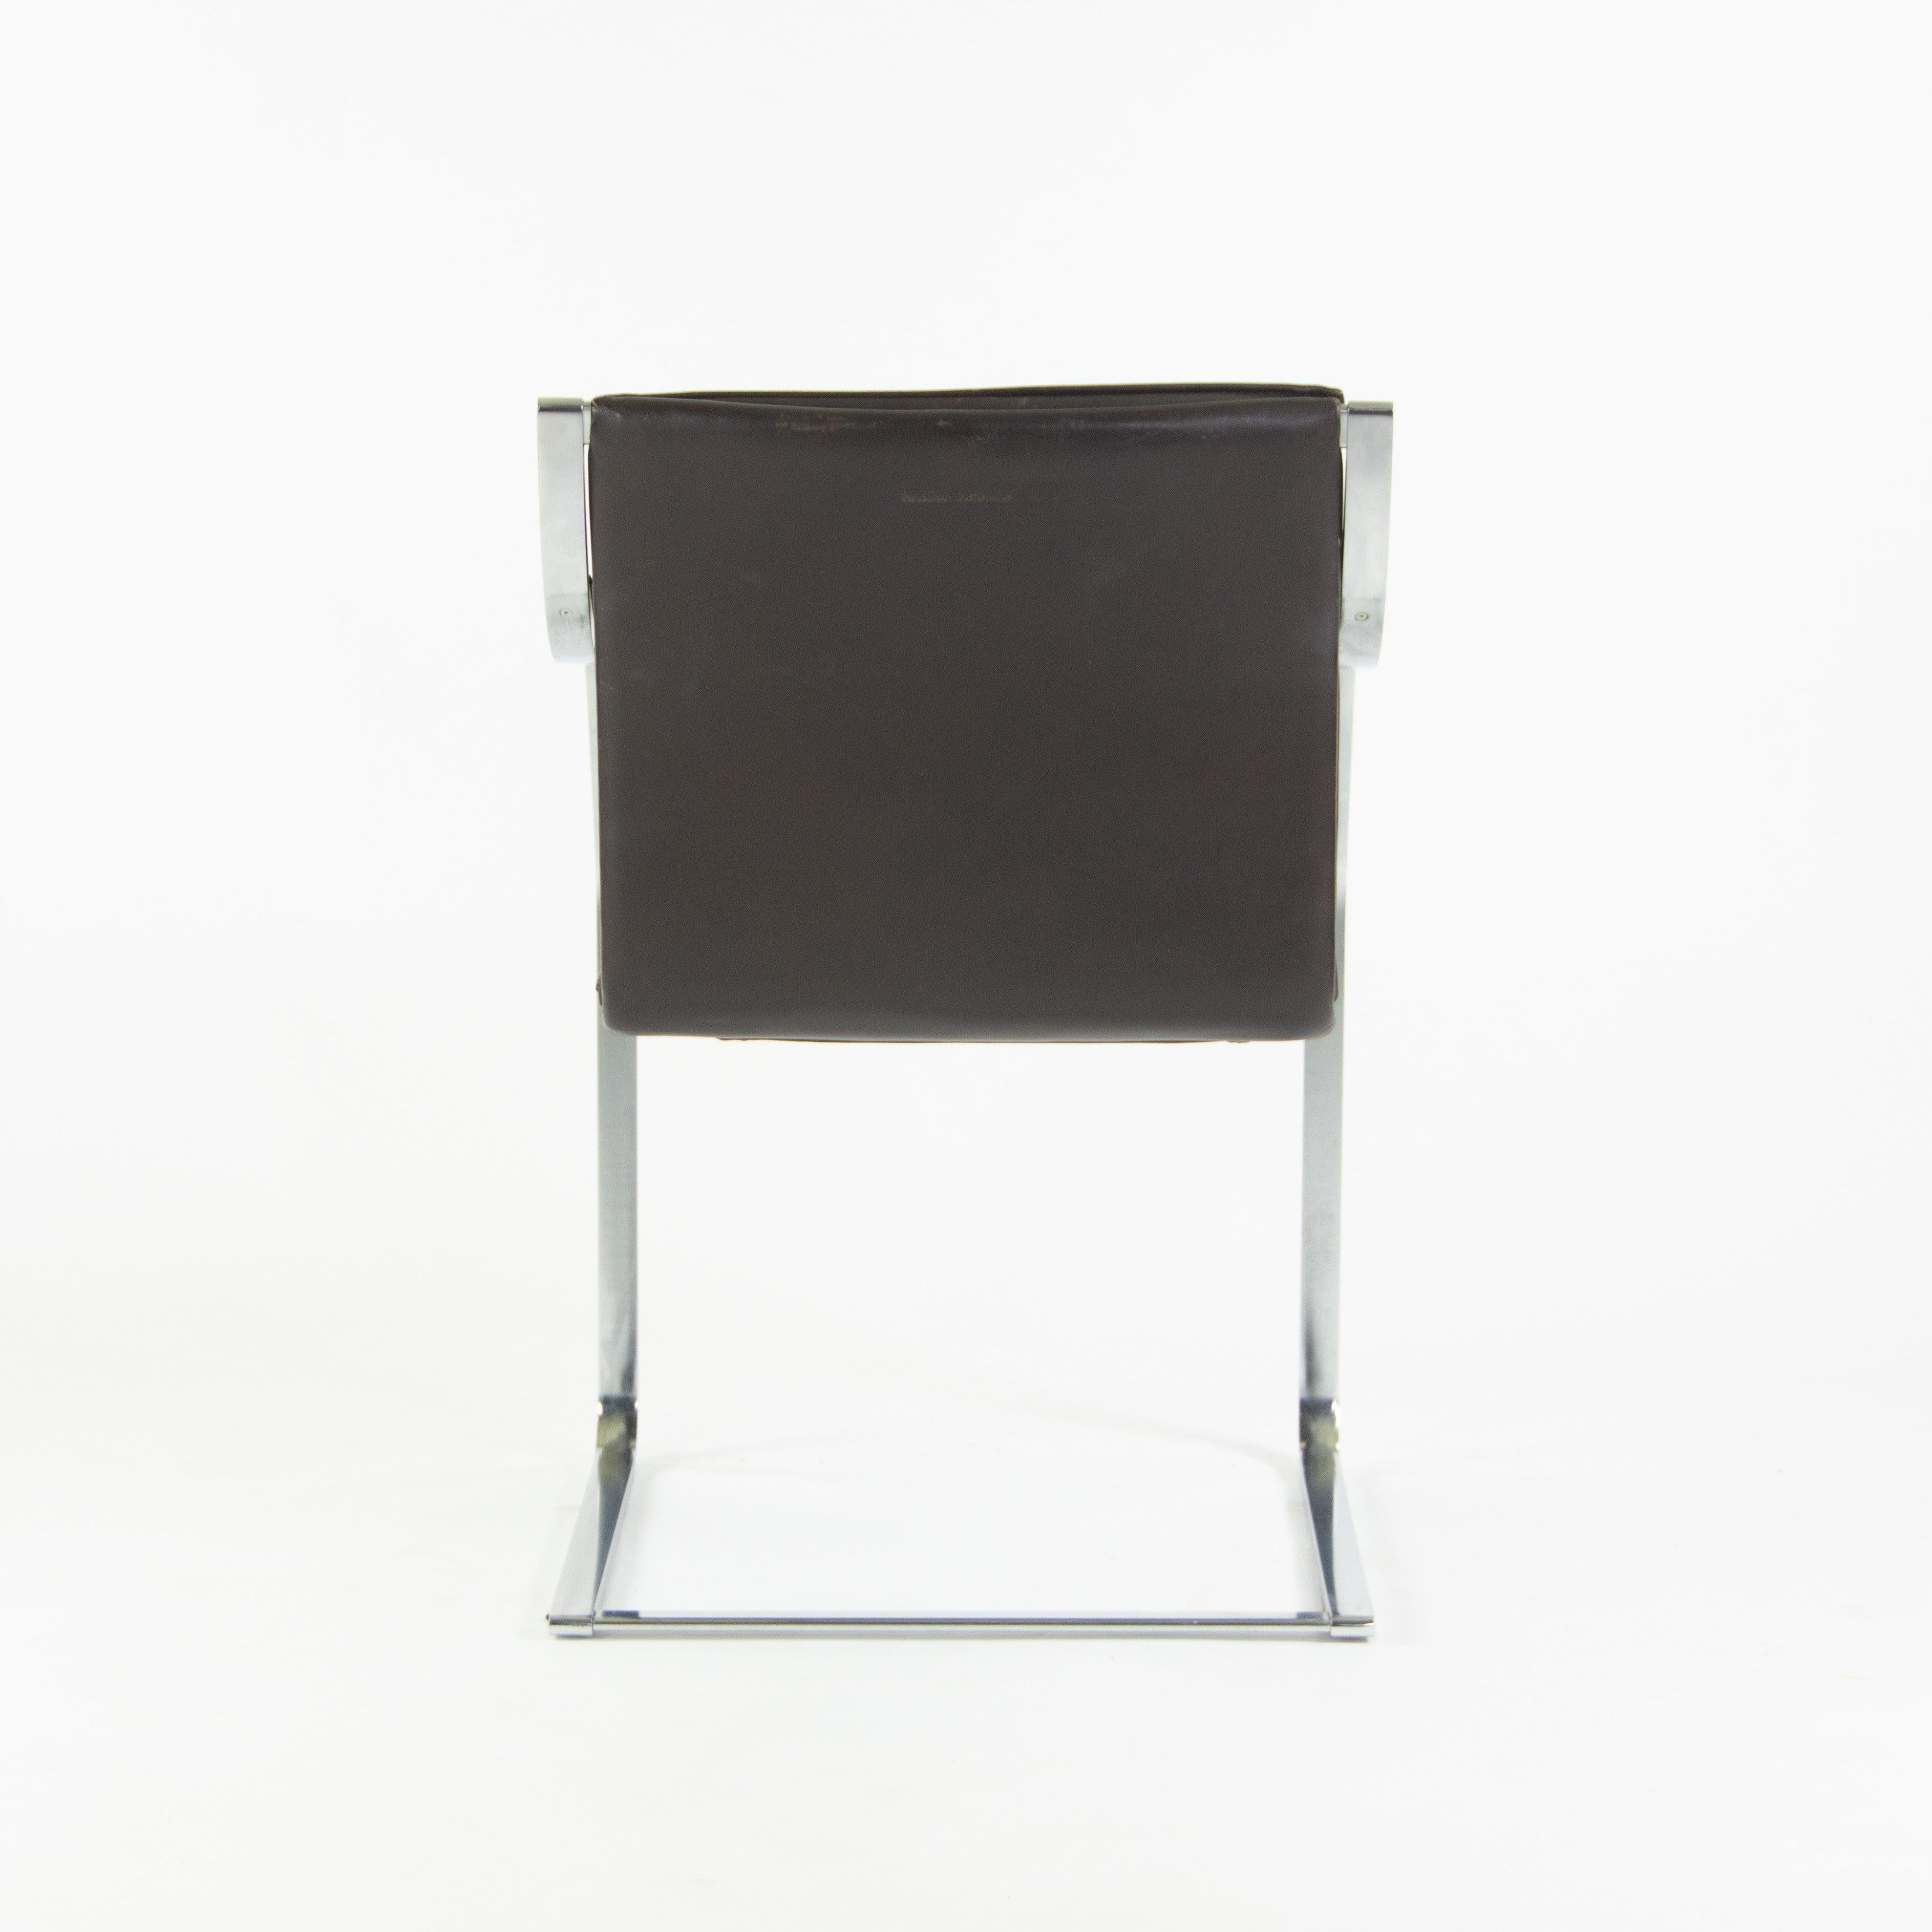 Late 20th Century Rudolf B. Glatzel Vintage Walter Knoll Art Collection Leather & Stainless Chair For Sale